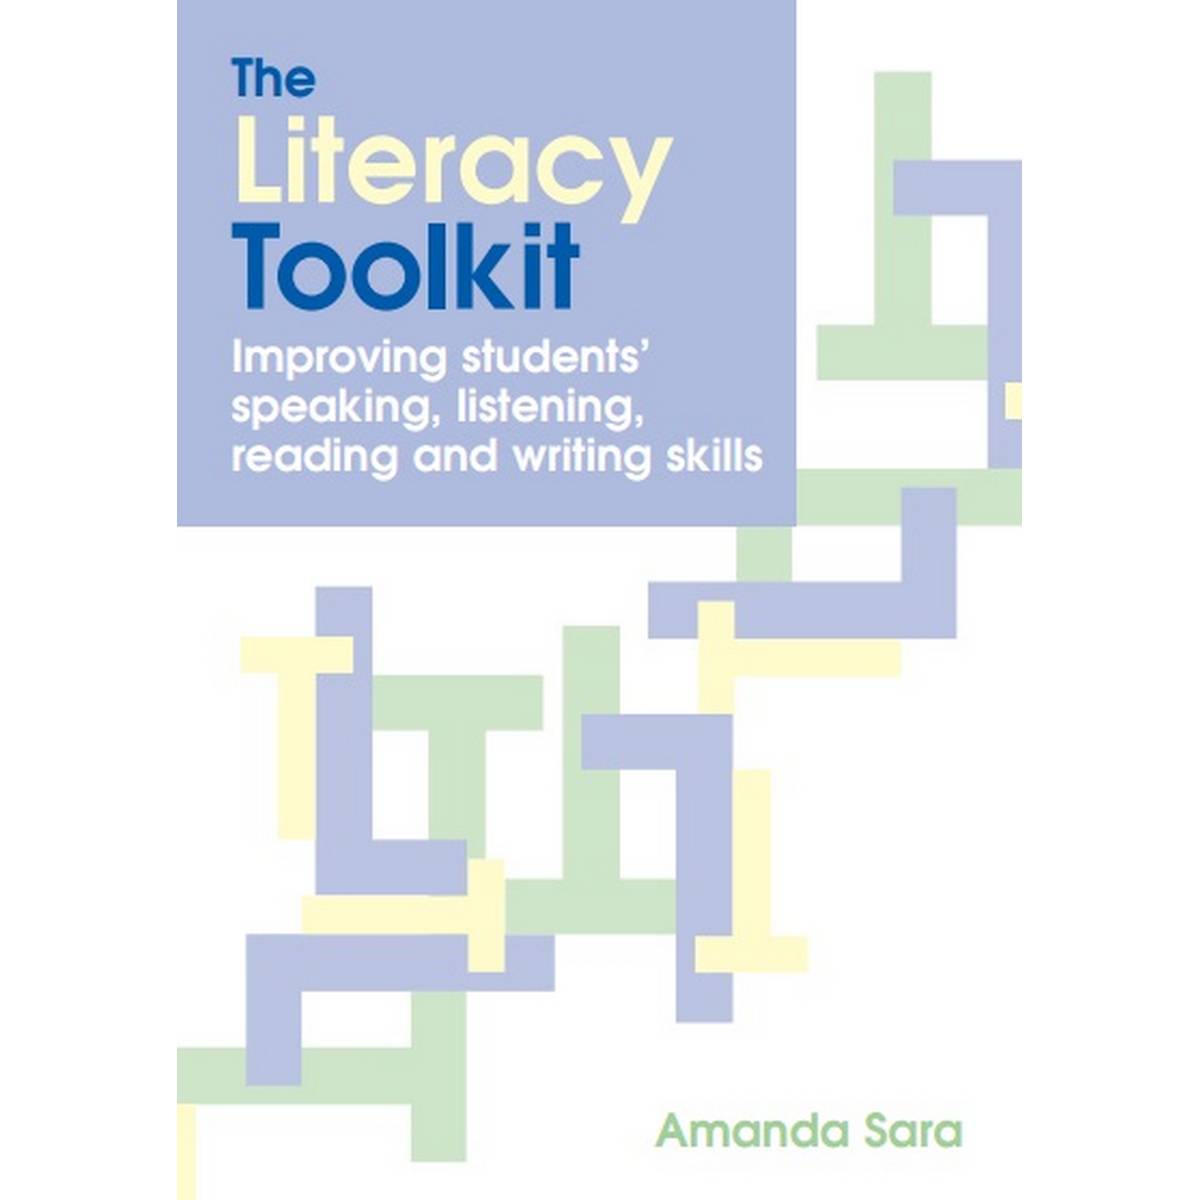 Literacy Toolkit: Improving students speaking, listening, reading and writing skills